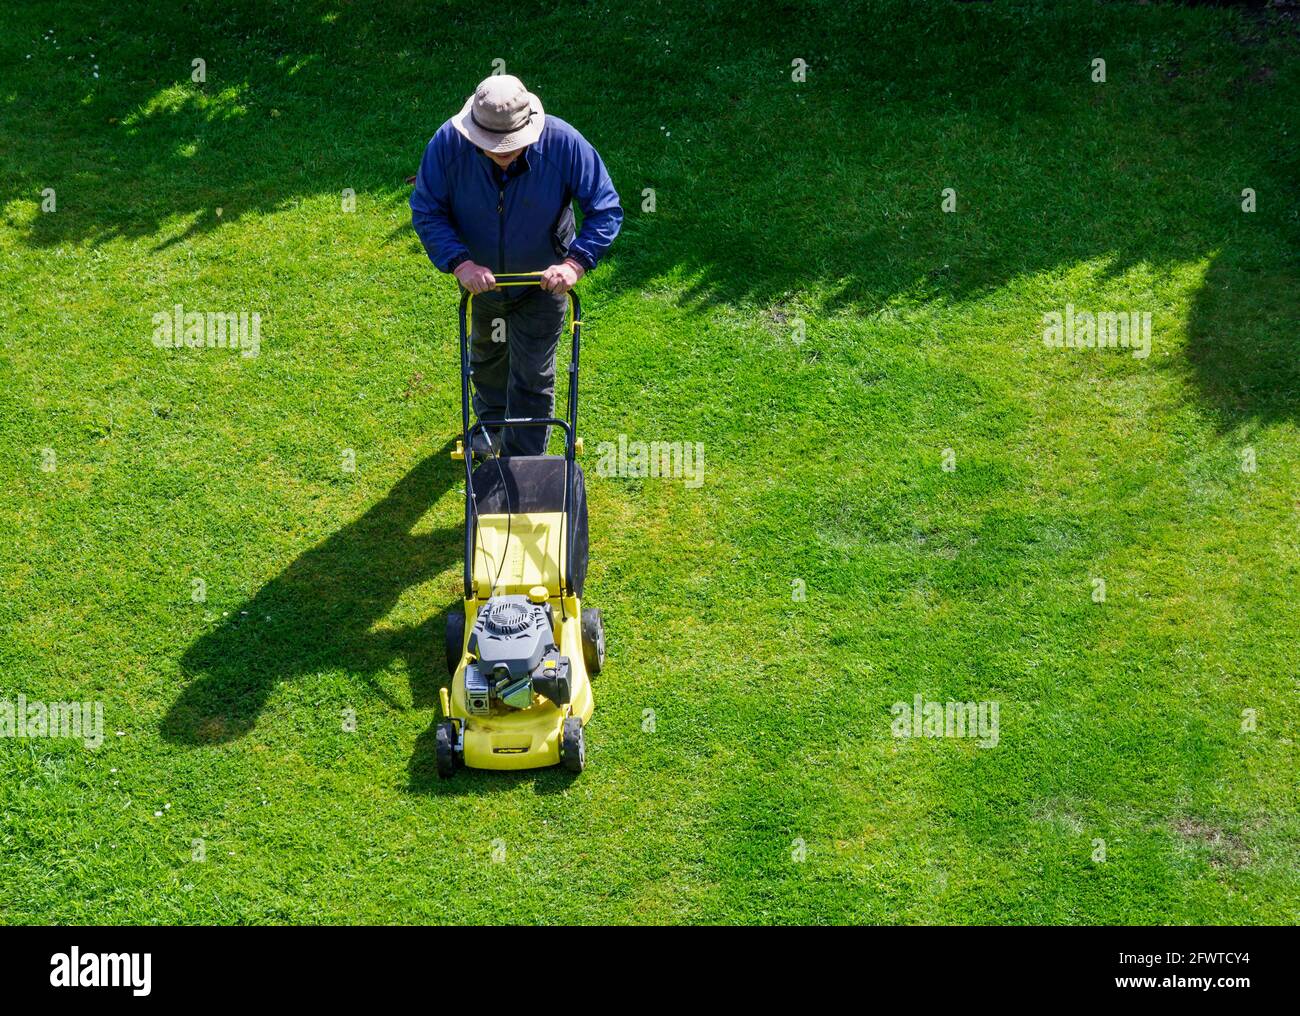 man tending his garden cutting the lawn with his mower Stock Photo